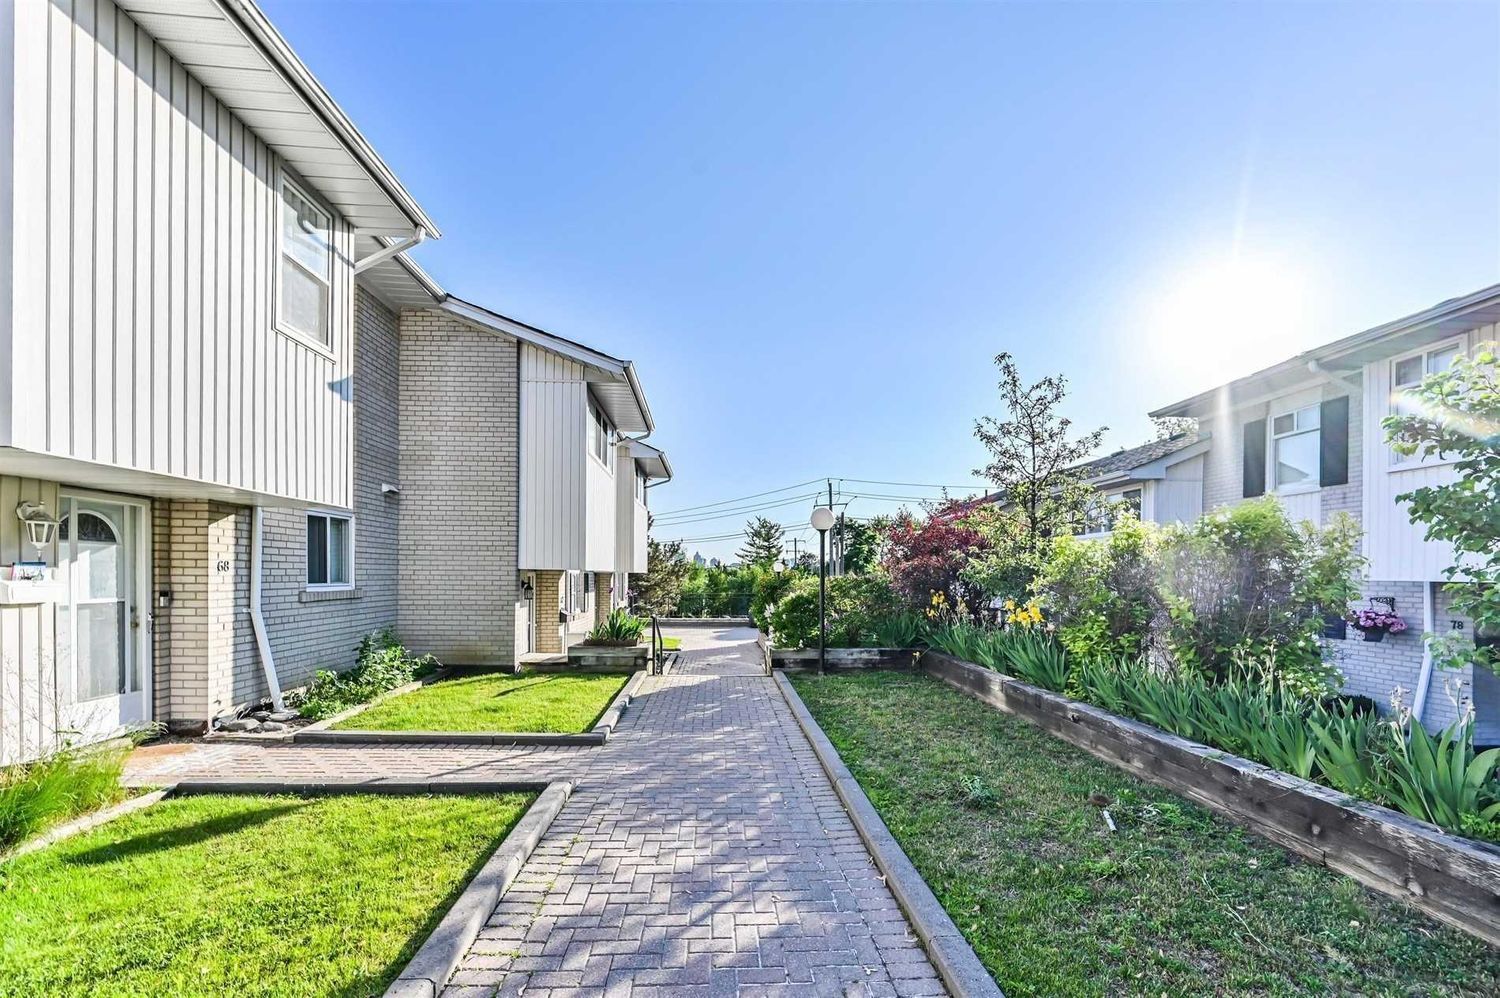 9-25 Esterbrooke Avenue. Esterbrooke Avenue Townhomes is located in  North York, Toronto - image #2 of 2